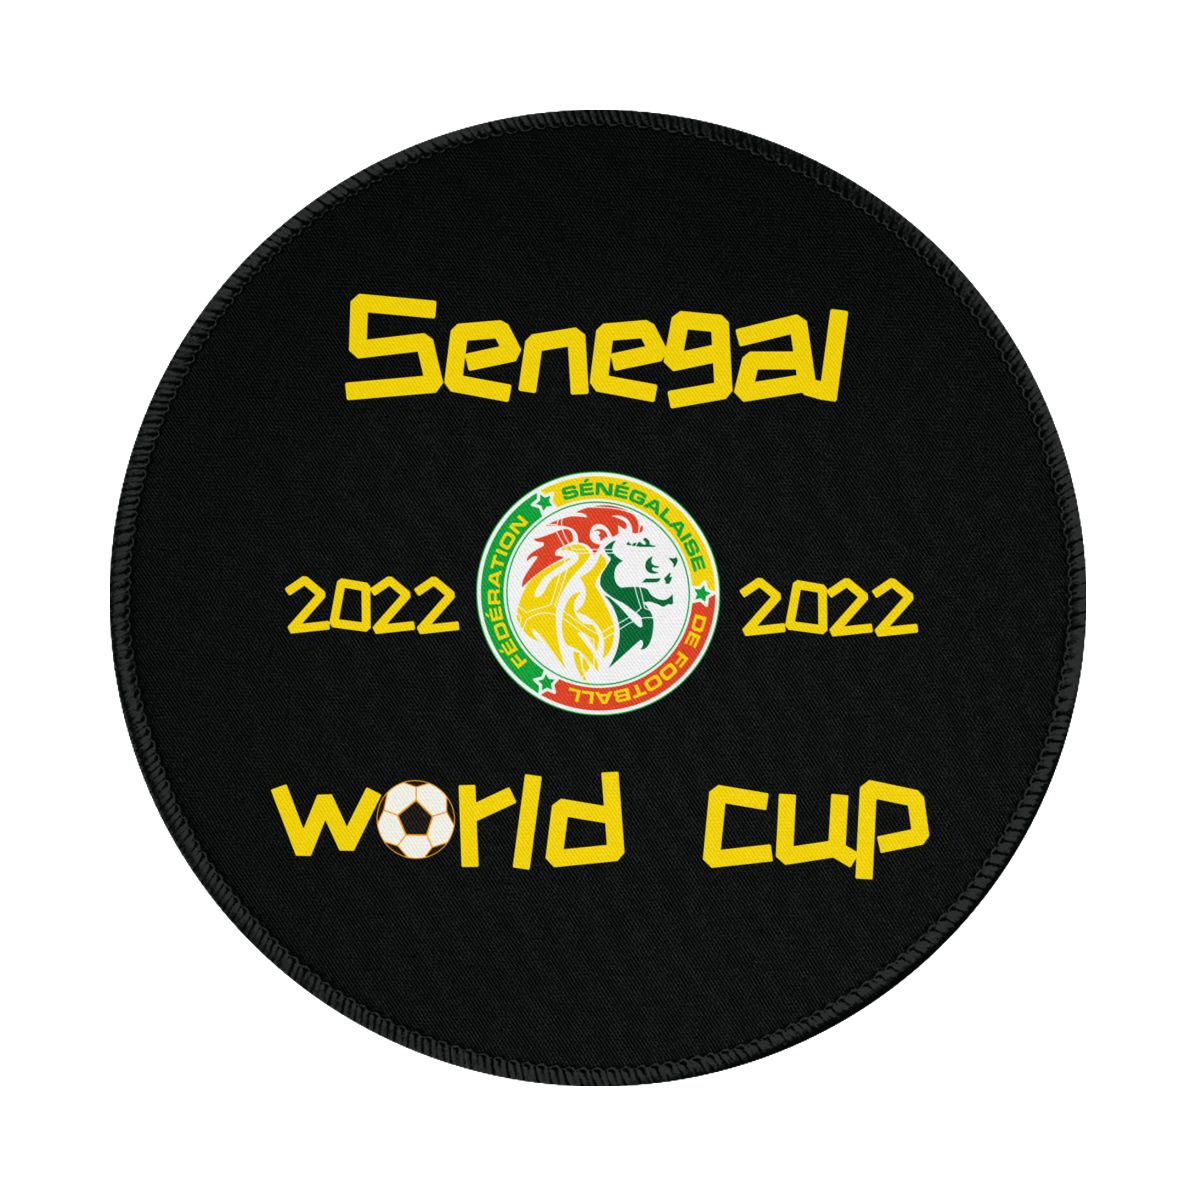 Senegal 2022 World Cup Team Logo Gaming Round Mousepad for Computer Laptop